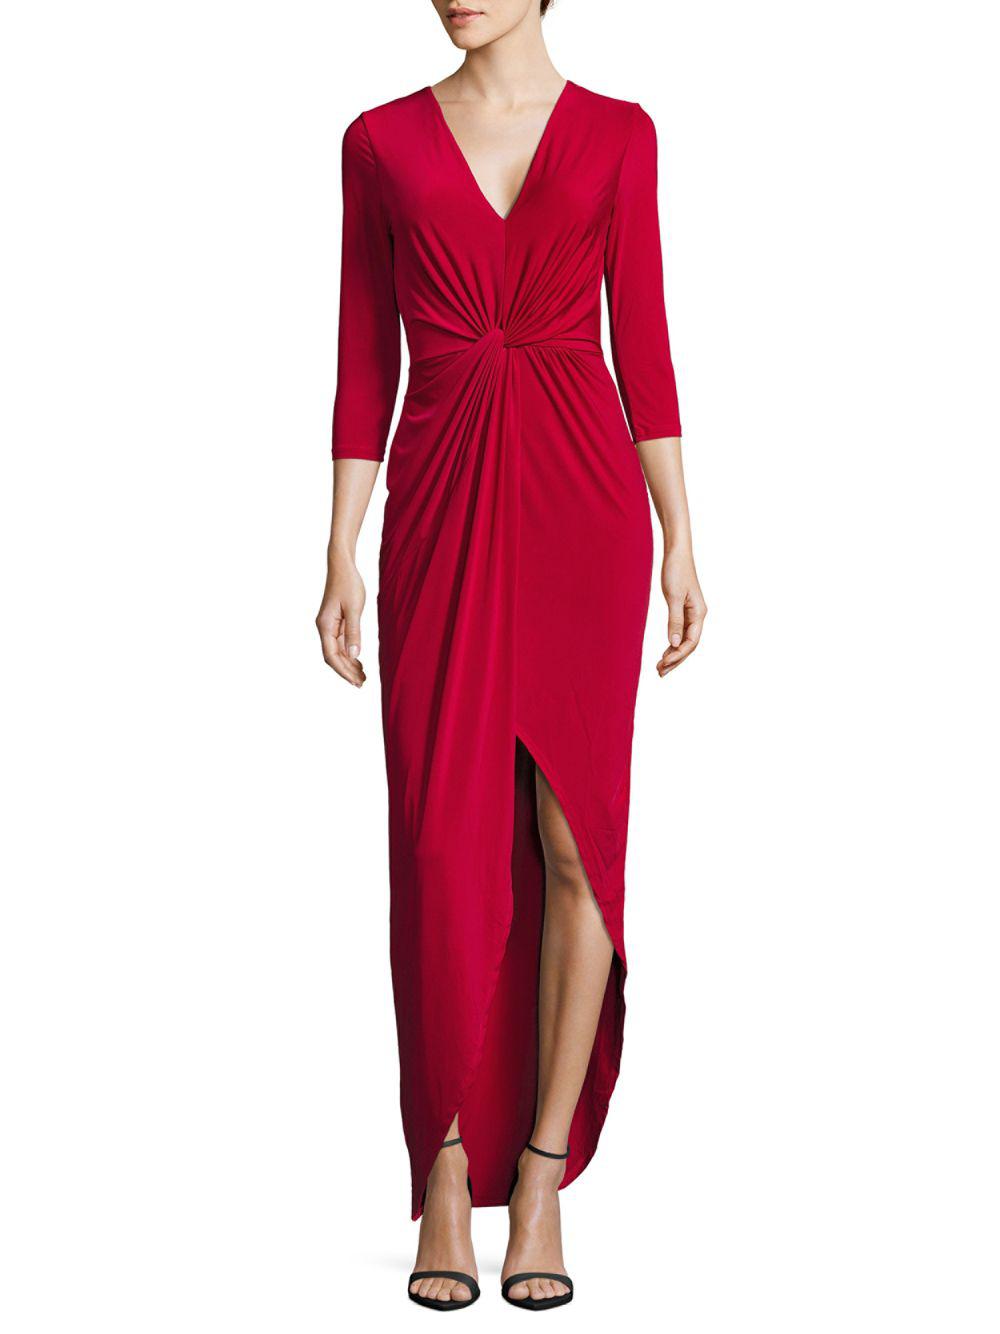 Lovers + Friends Synthetic Sundance Maxi Dress in Raspberry (Red) - Lyst